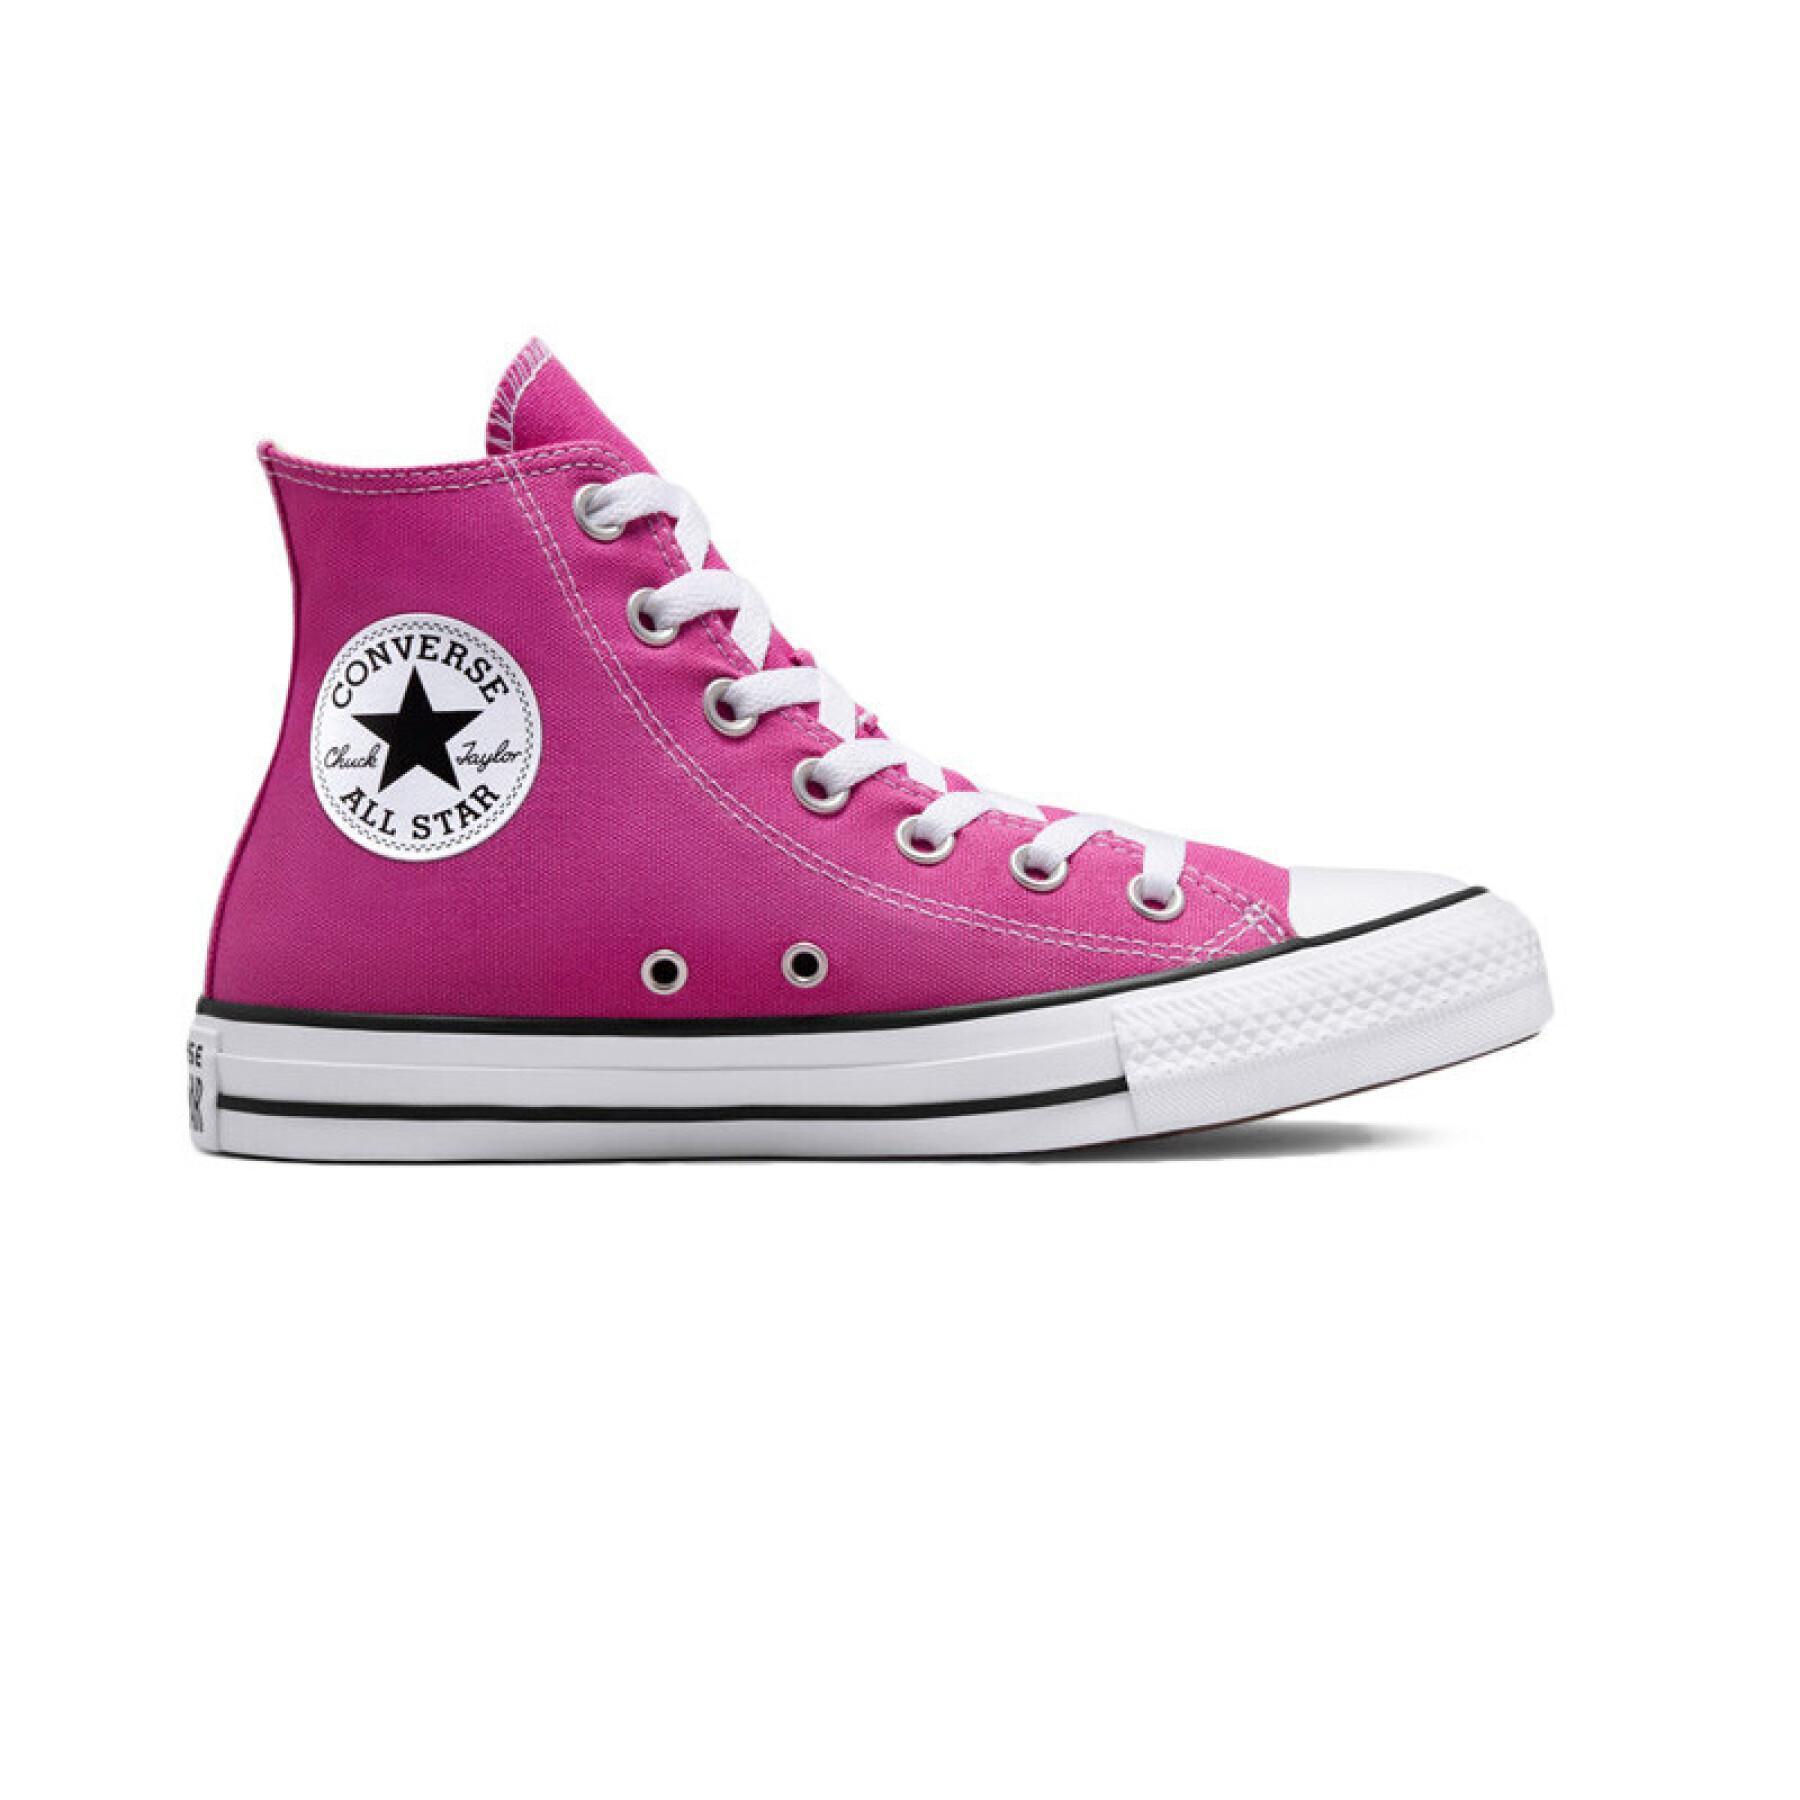 Trainers Converse Chuck Taylor All Star